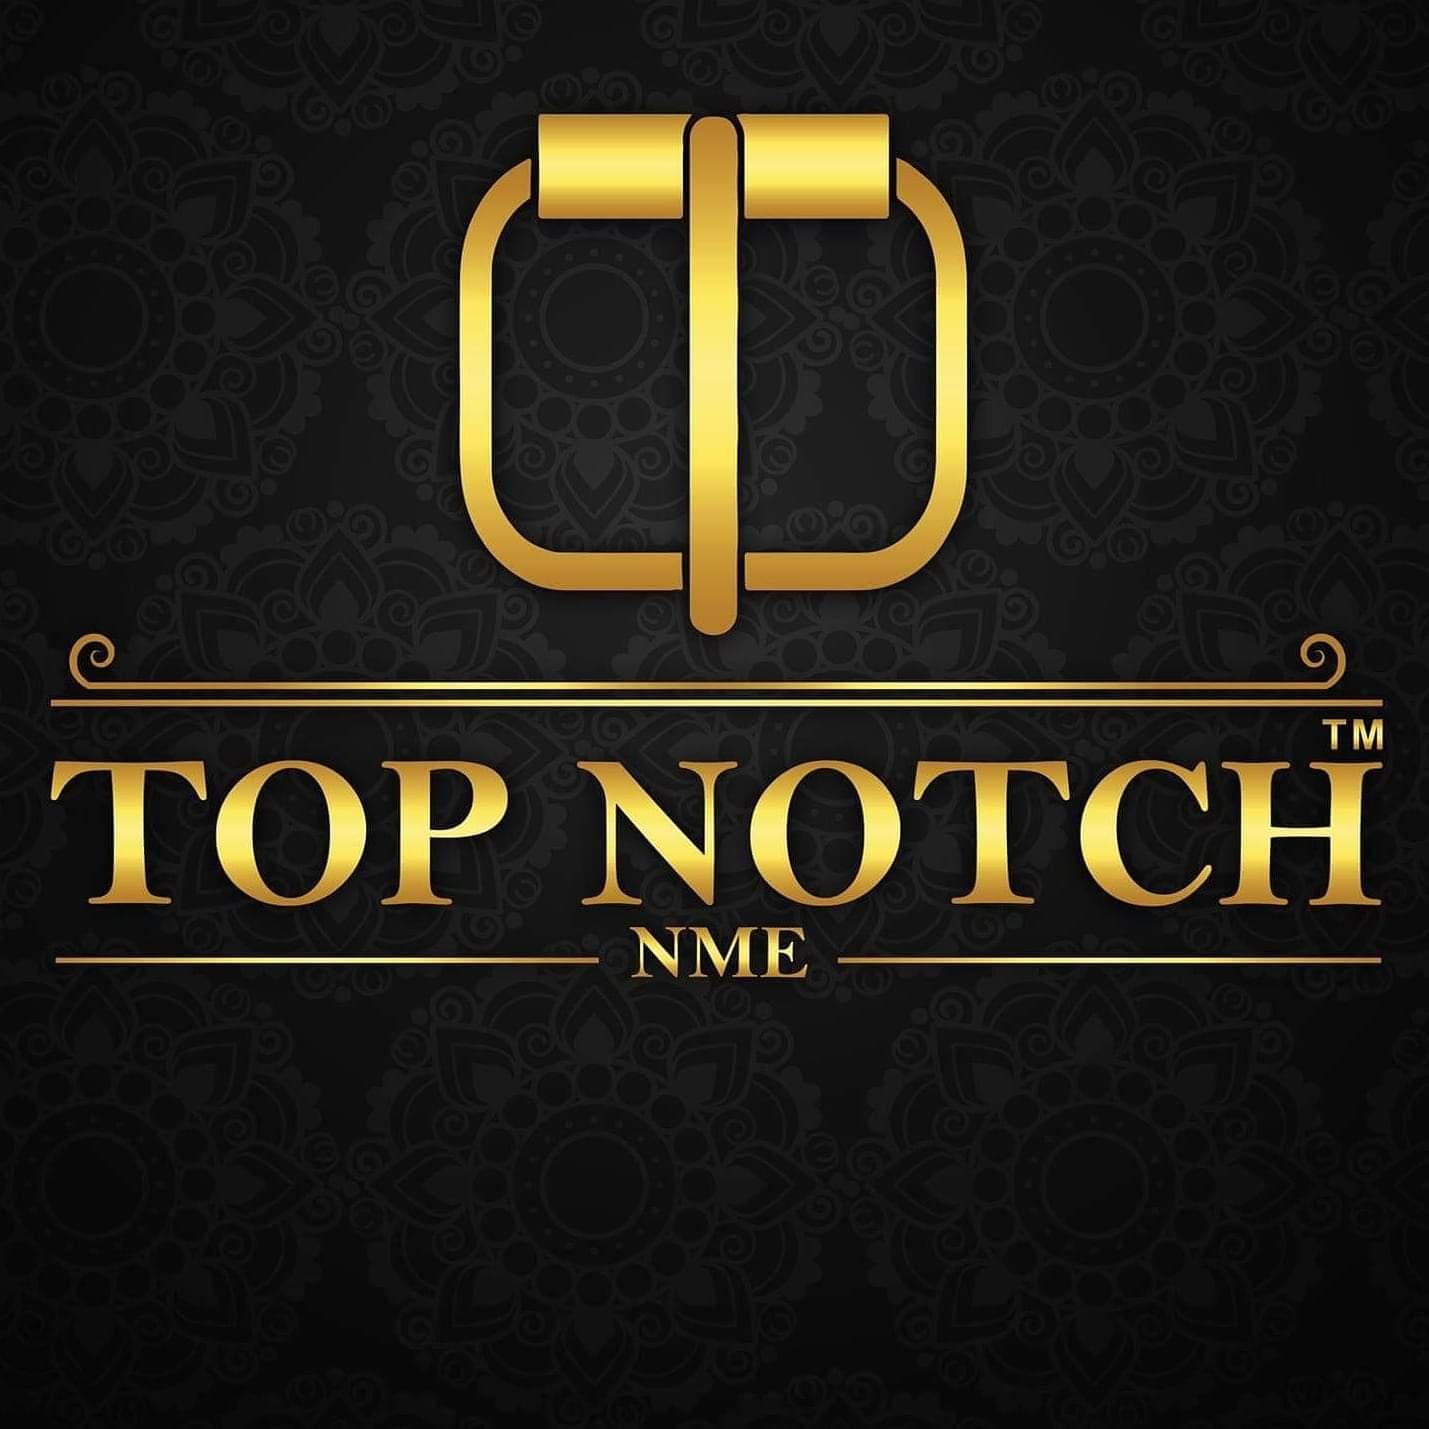 Top Notch NME®️ - Official Website